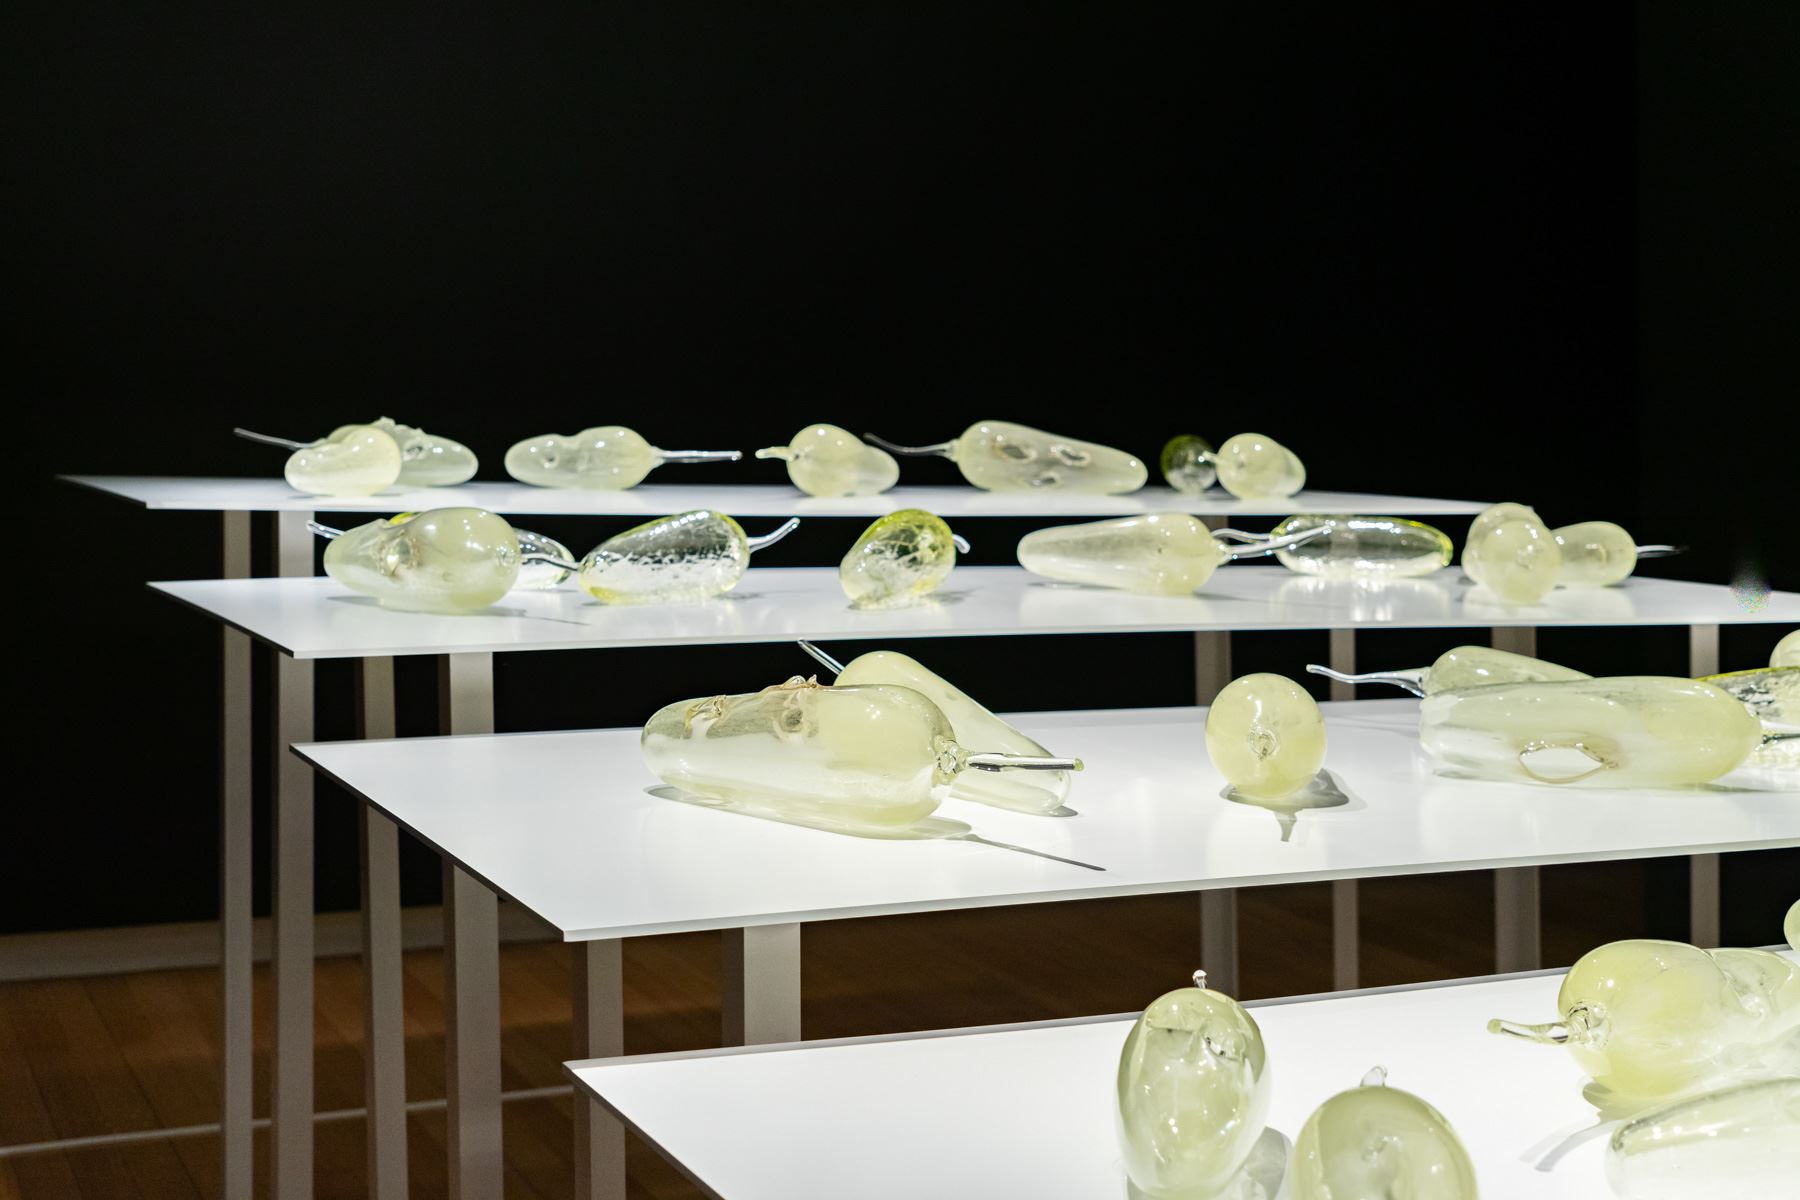 Yhonnie SCARCE Hollowing Earth (installation view) 2016-17, blown and hot formed Uranium glass dimensions variable. Collection of the artist. Courtesy of the artist and THIS IS NO FANTASY, Melbourne. Photo by Louis Lim. 